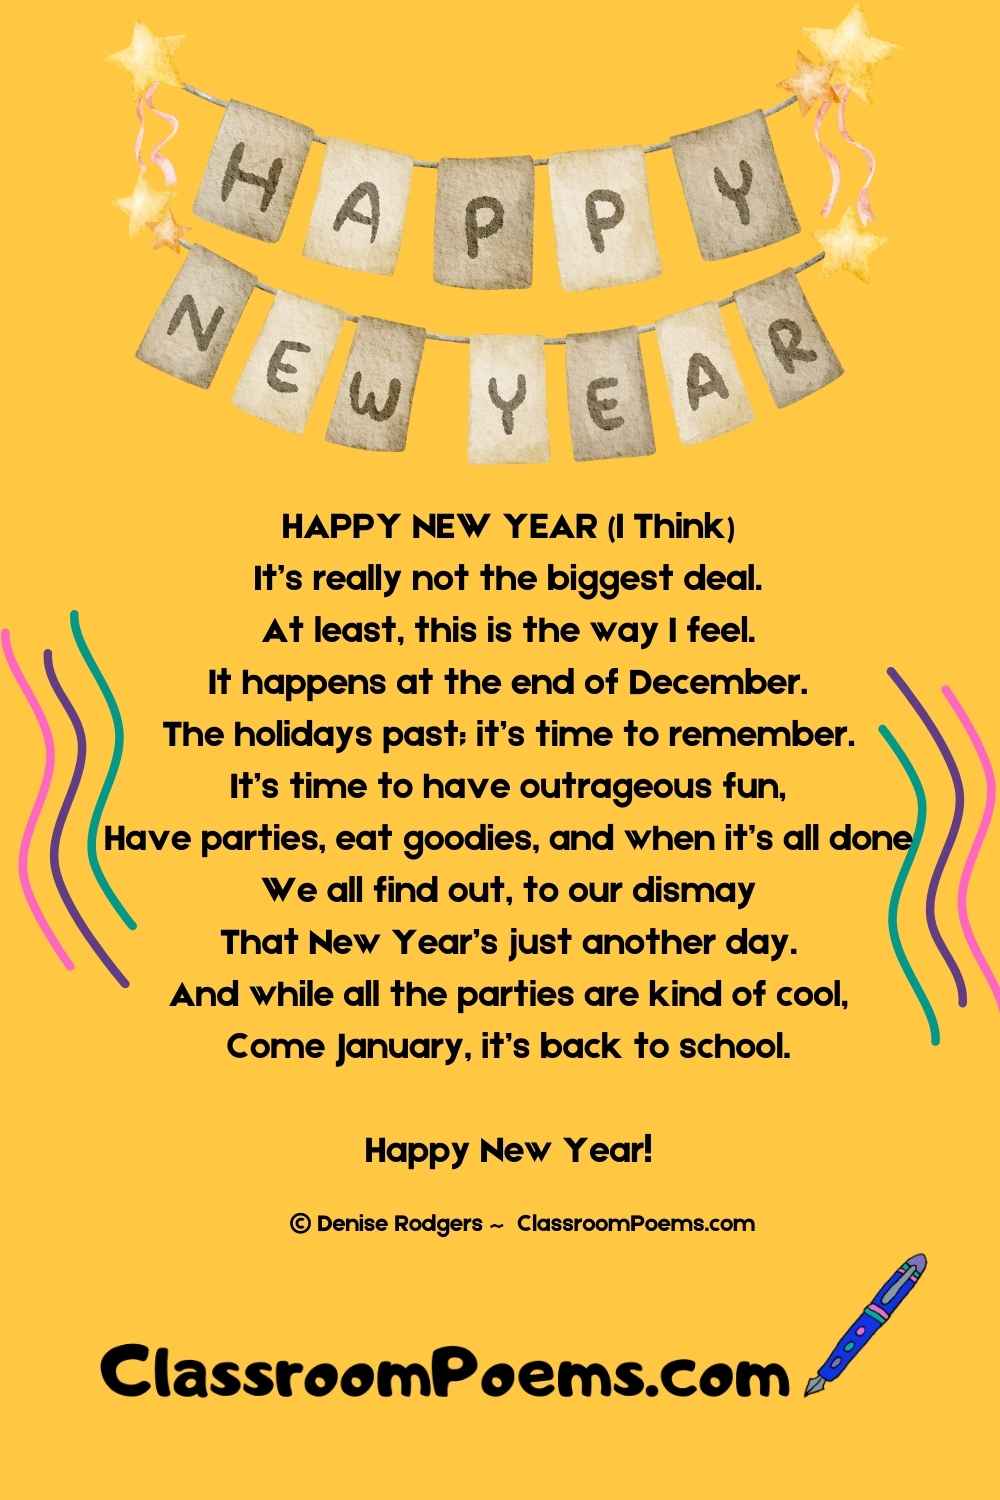 A Happy New Year poem by Denise Rodgers on ClassroomPoems.com.